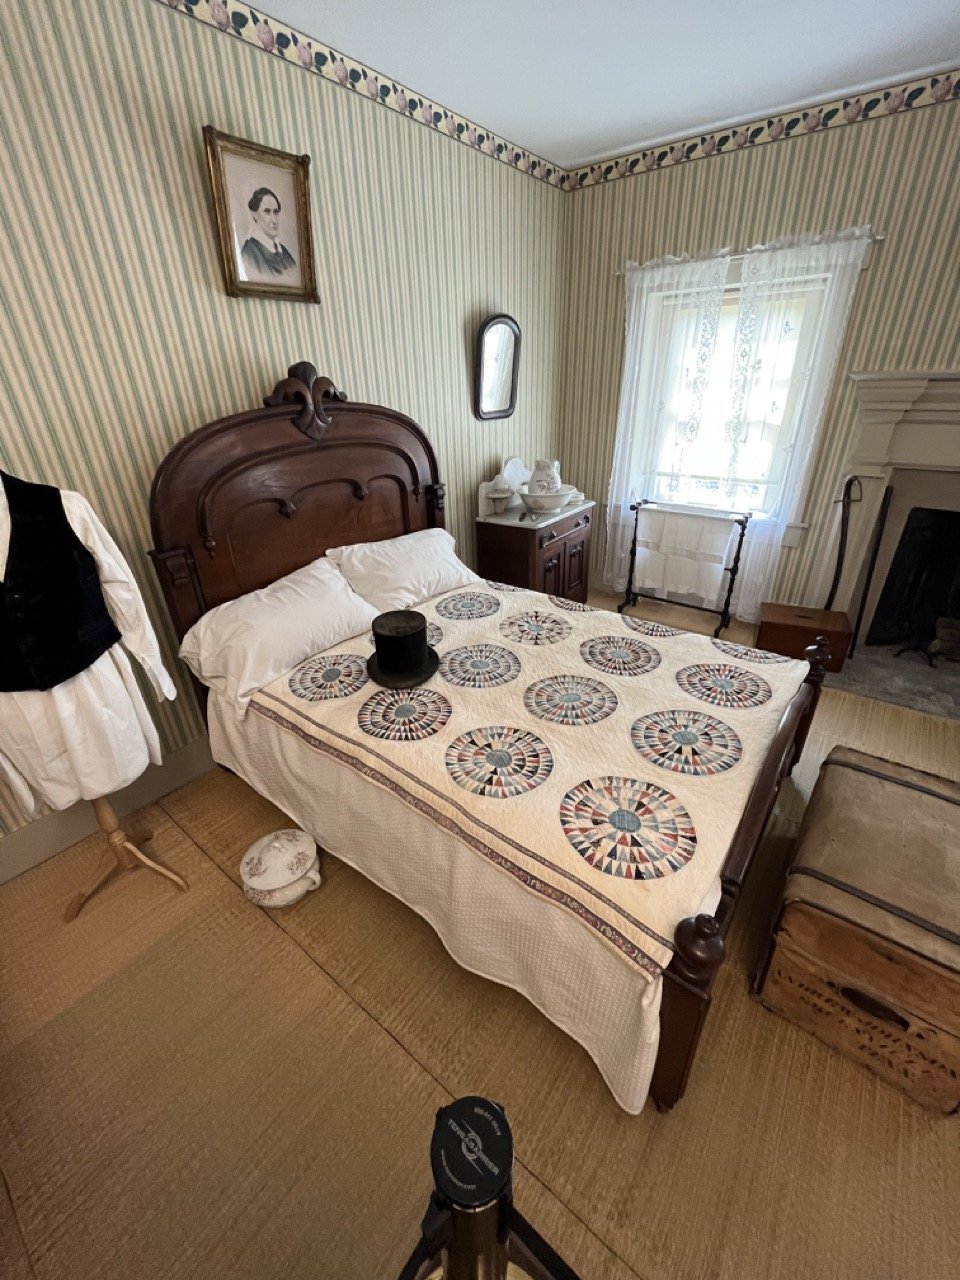 President Johnson's bed with his top hat on it.